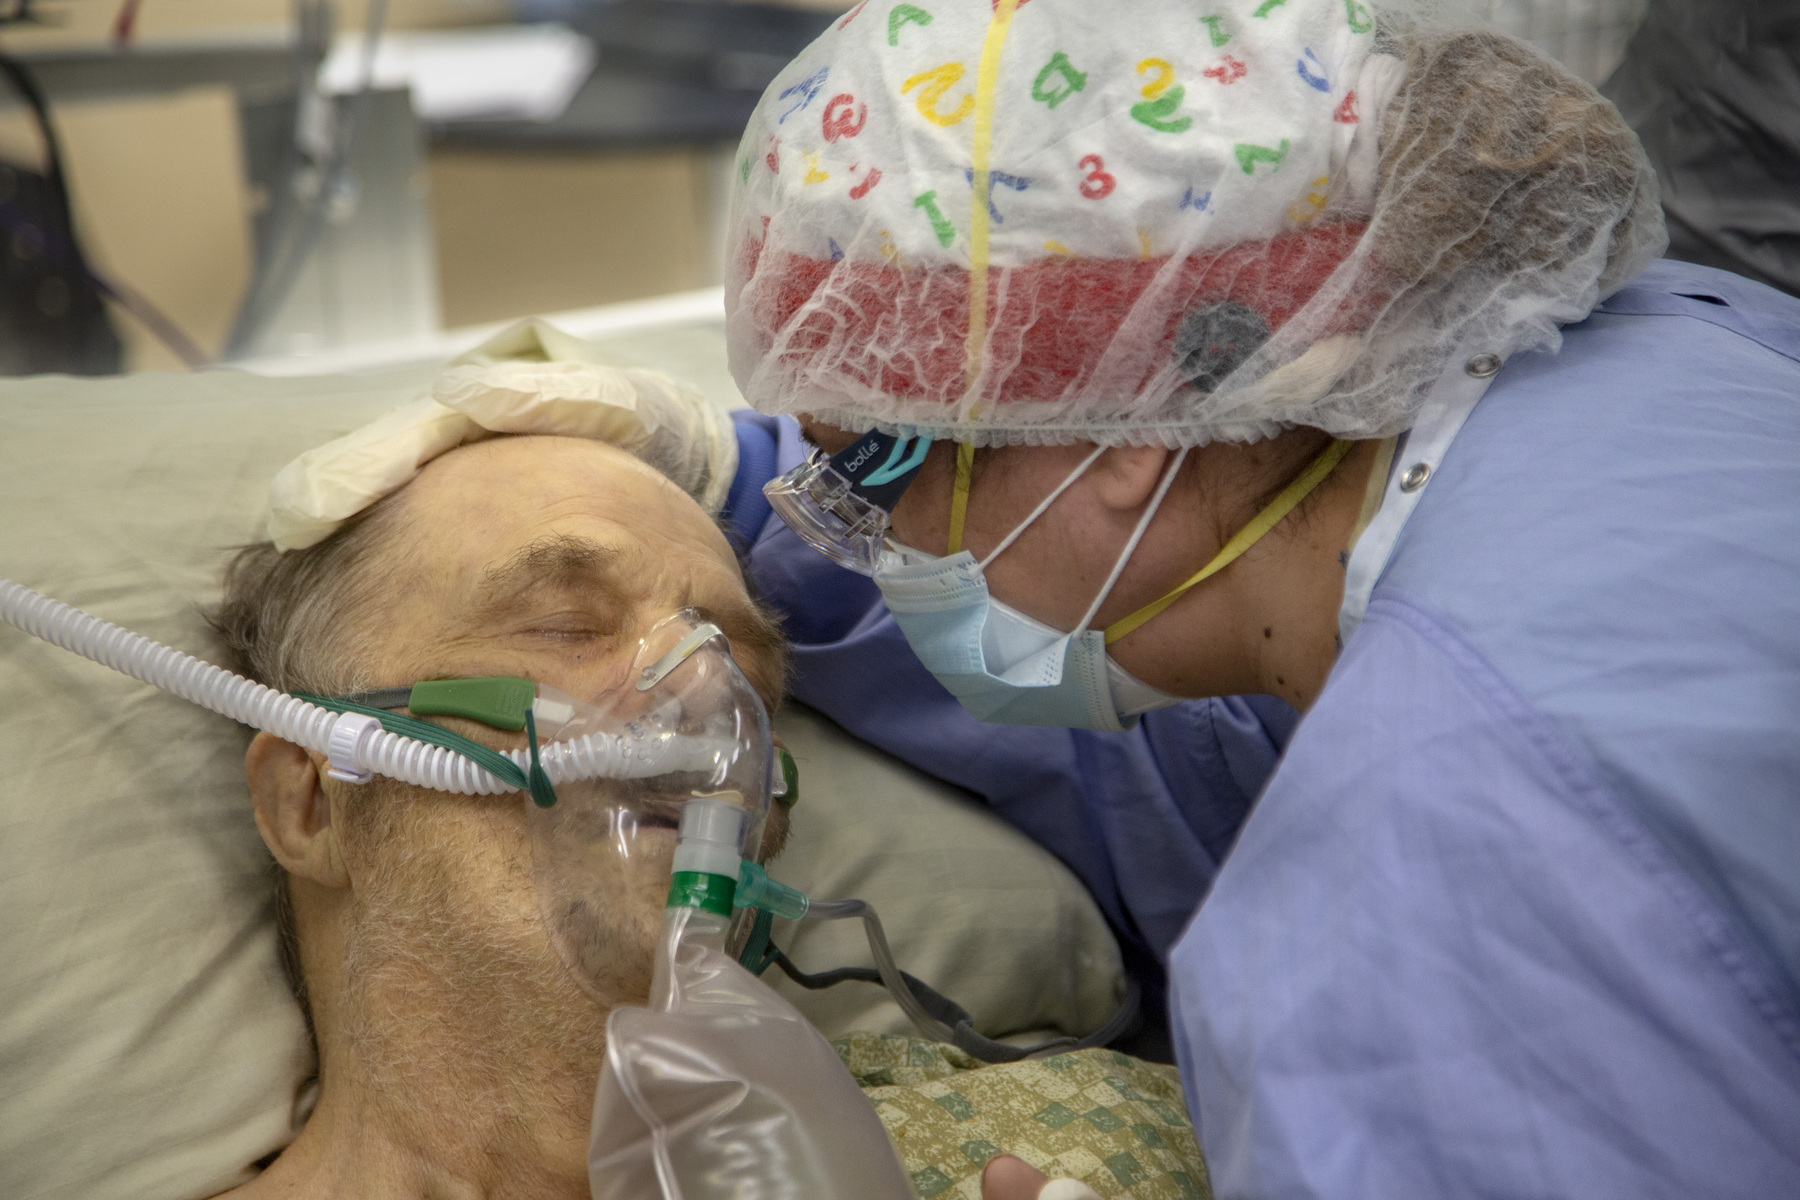 A patient is comforted in the ICU at Holy Name Medical Center. He passed hours later from COVID-19. 4/21/2020 Photo by Jeff Rhode